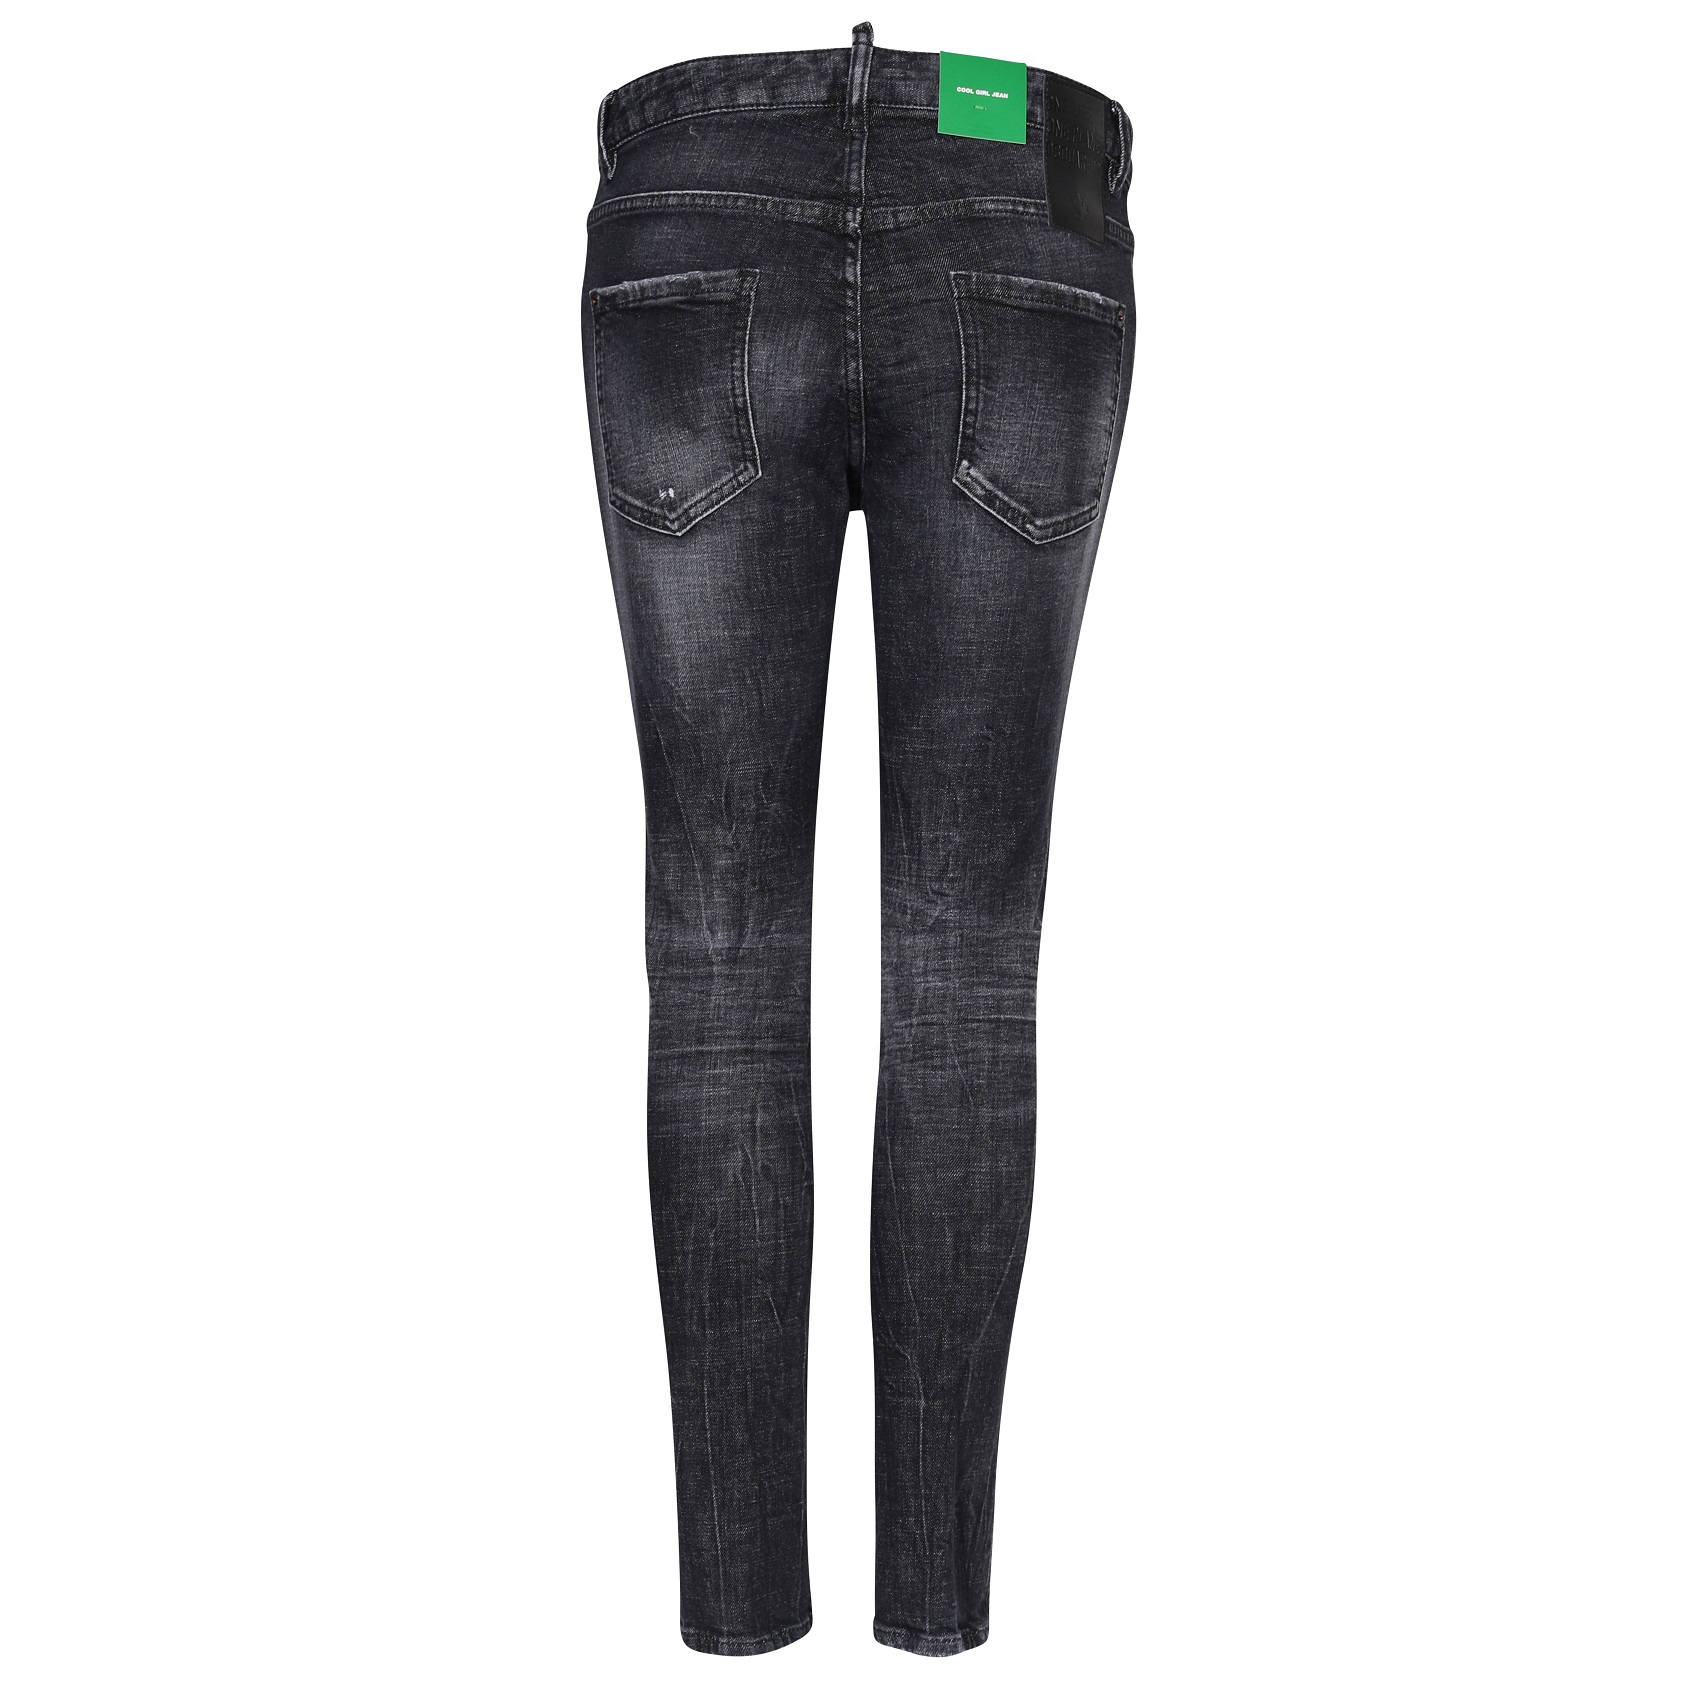 DSQUARED2 Jeans Cool Girl Green Label in Washed Black 36